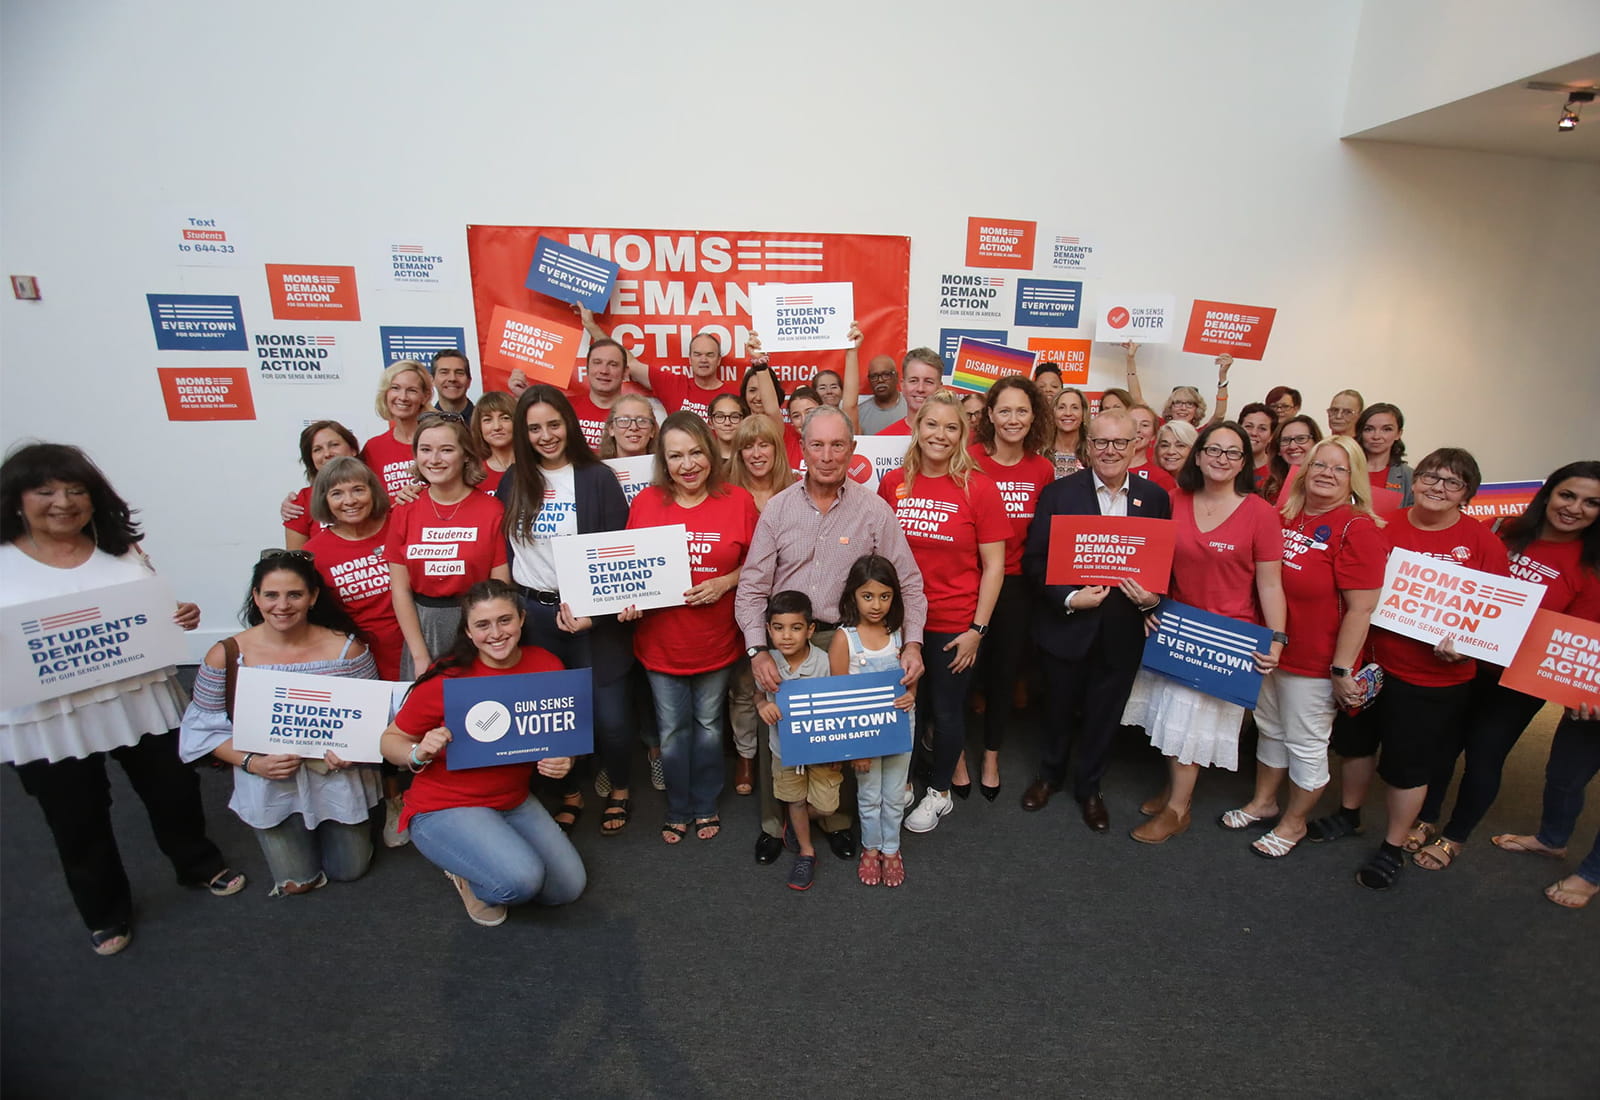 Mike Bloomberg joins Everytown and Moms Demand Action advocates in Las Vegas, NV for a local rally.